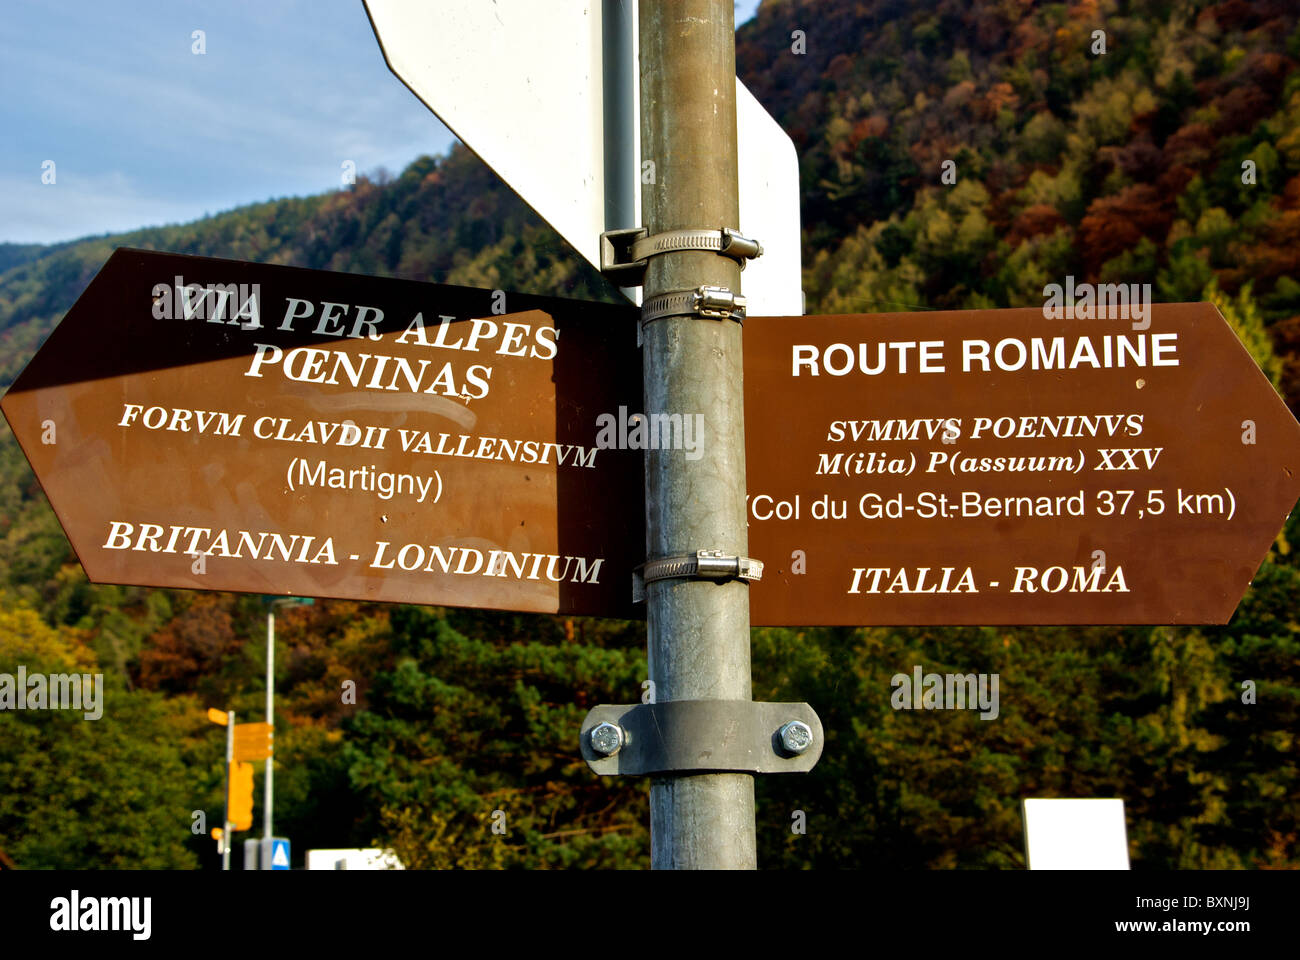 Sign showing directions to archaeological sites in Martigny Valais Switzerland Stock Photo